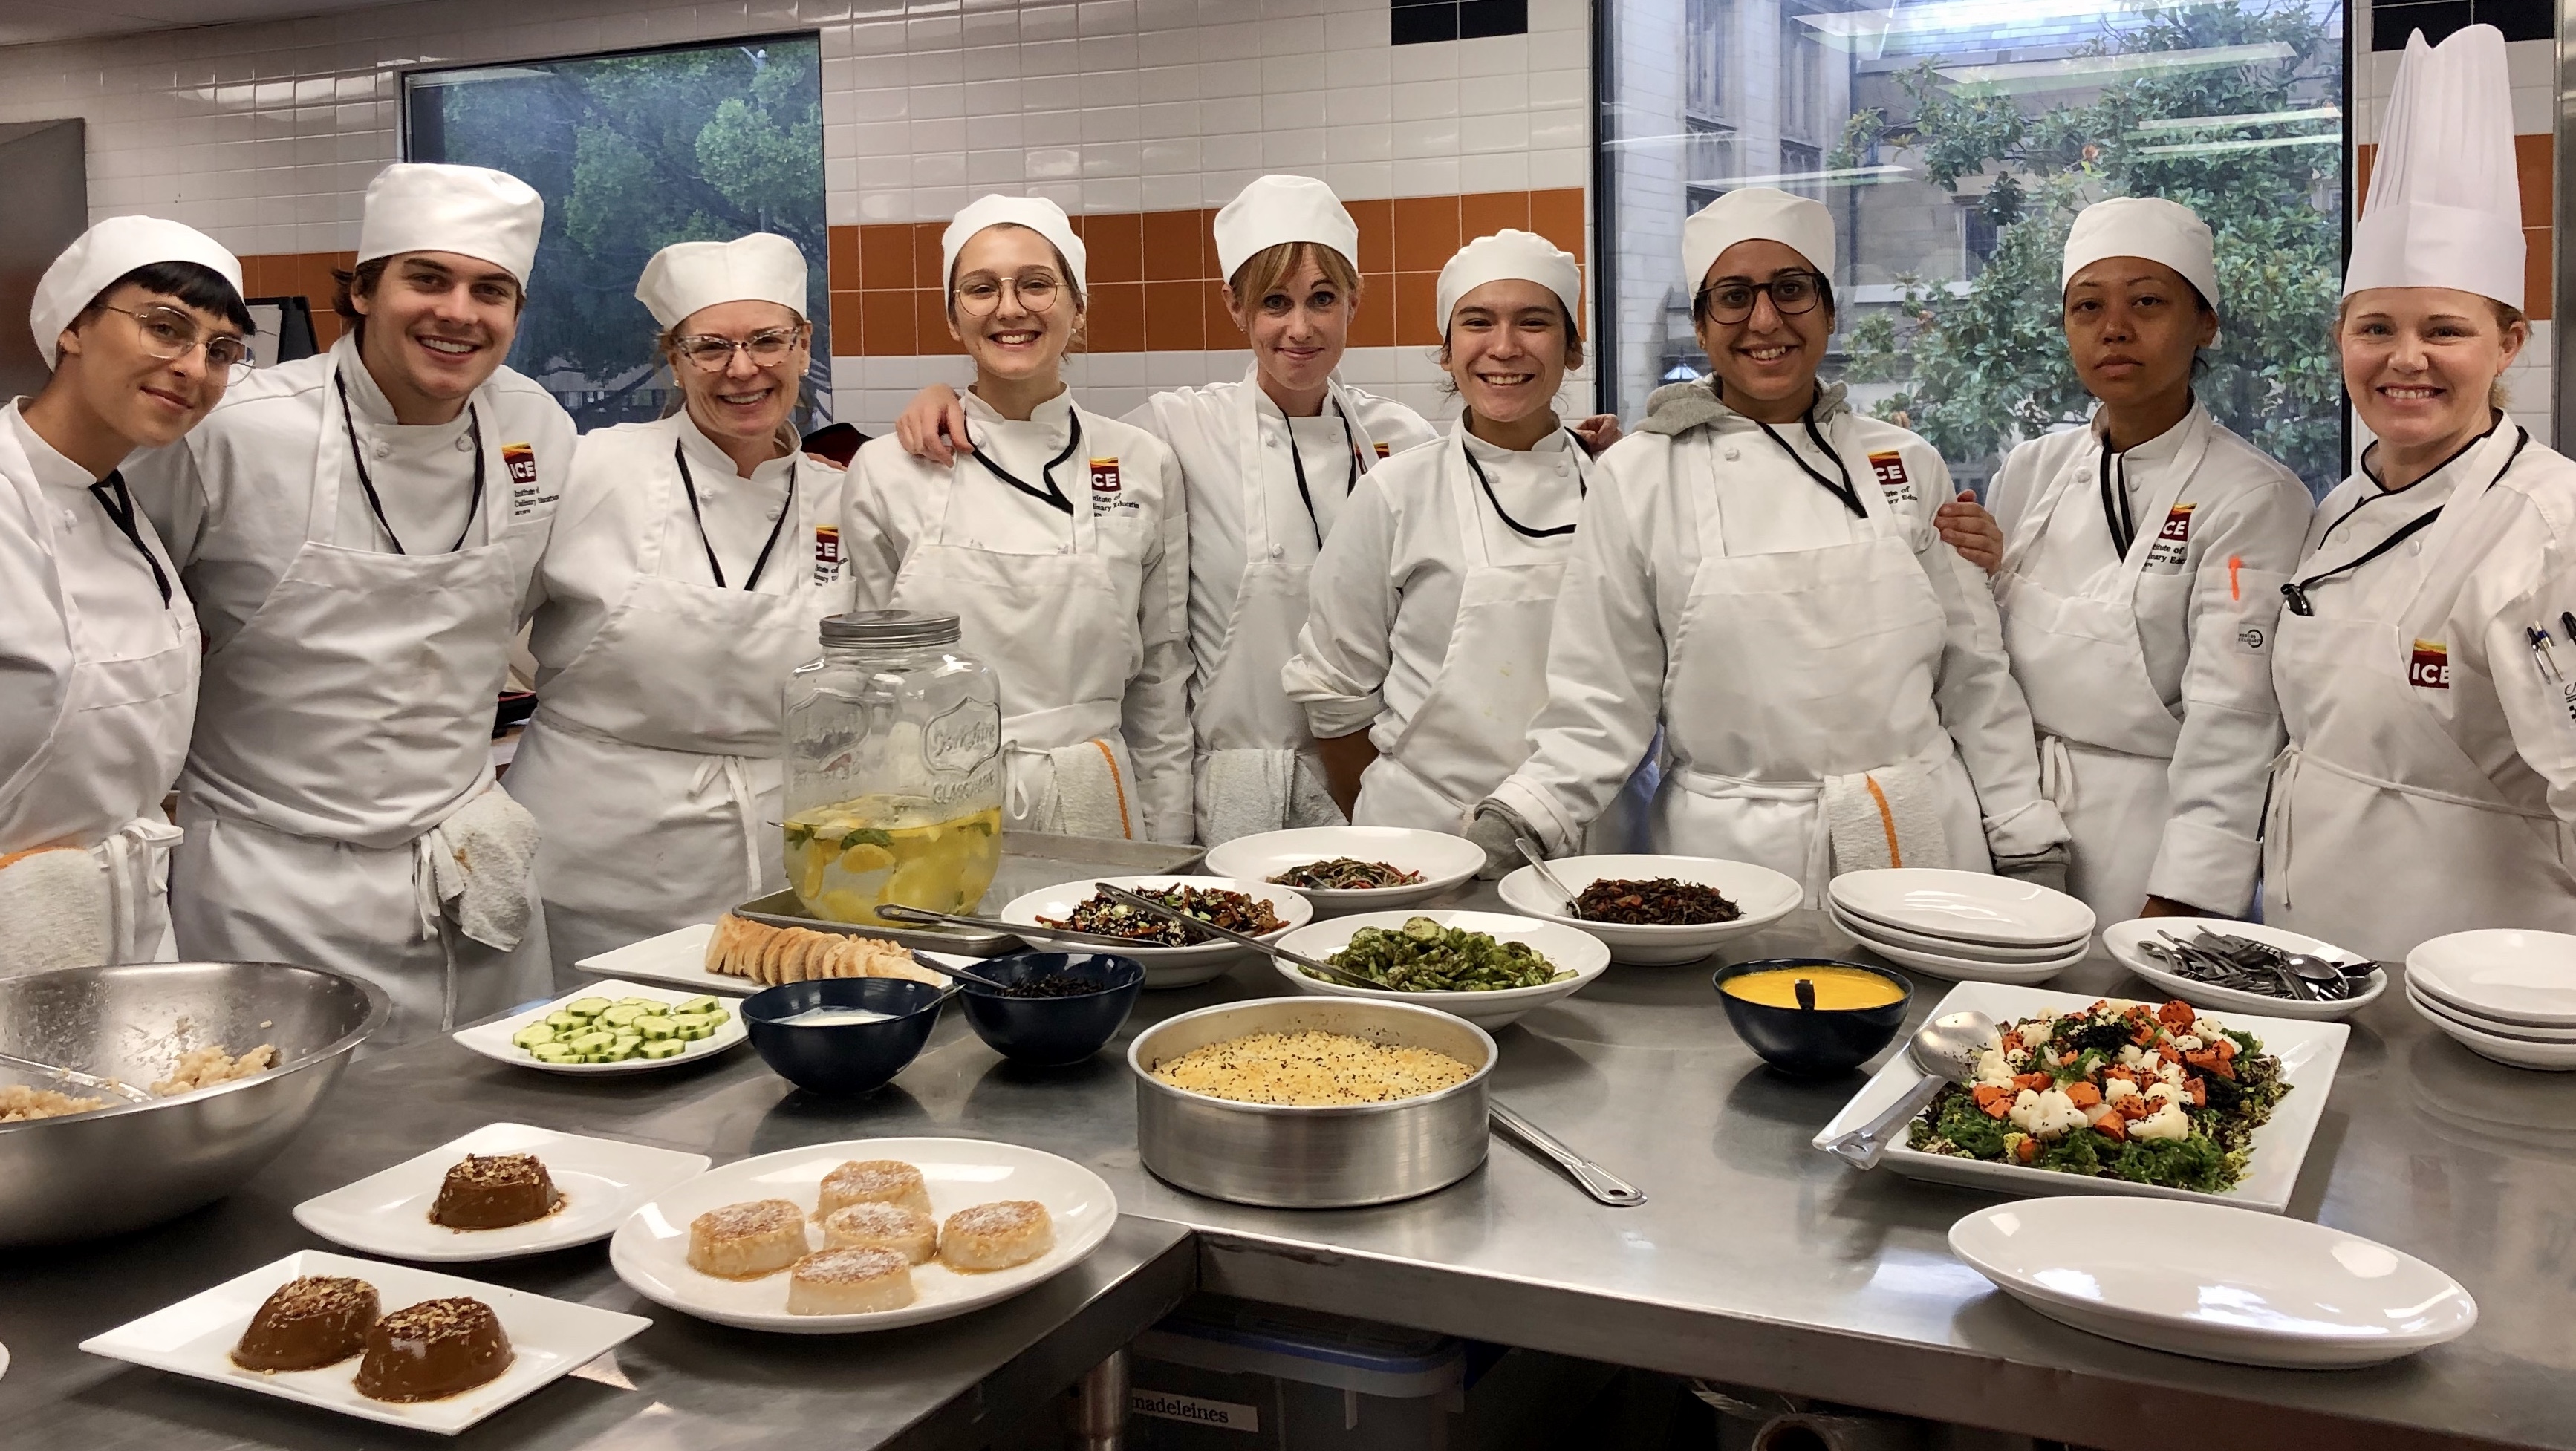 A group of Plant-Based Culinary Arts students stand behind a table of food next to Chef-Instructor Carrie Smith